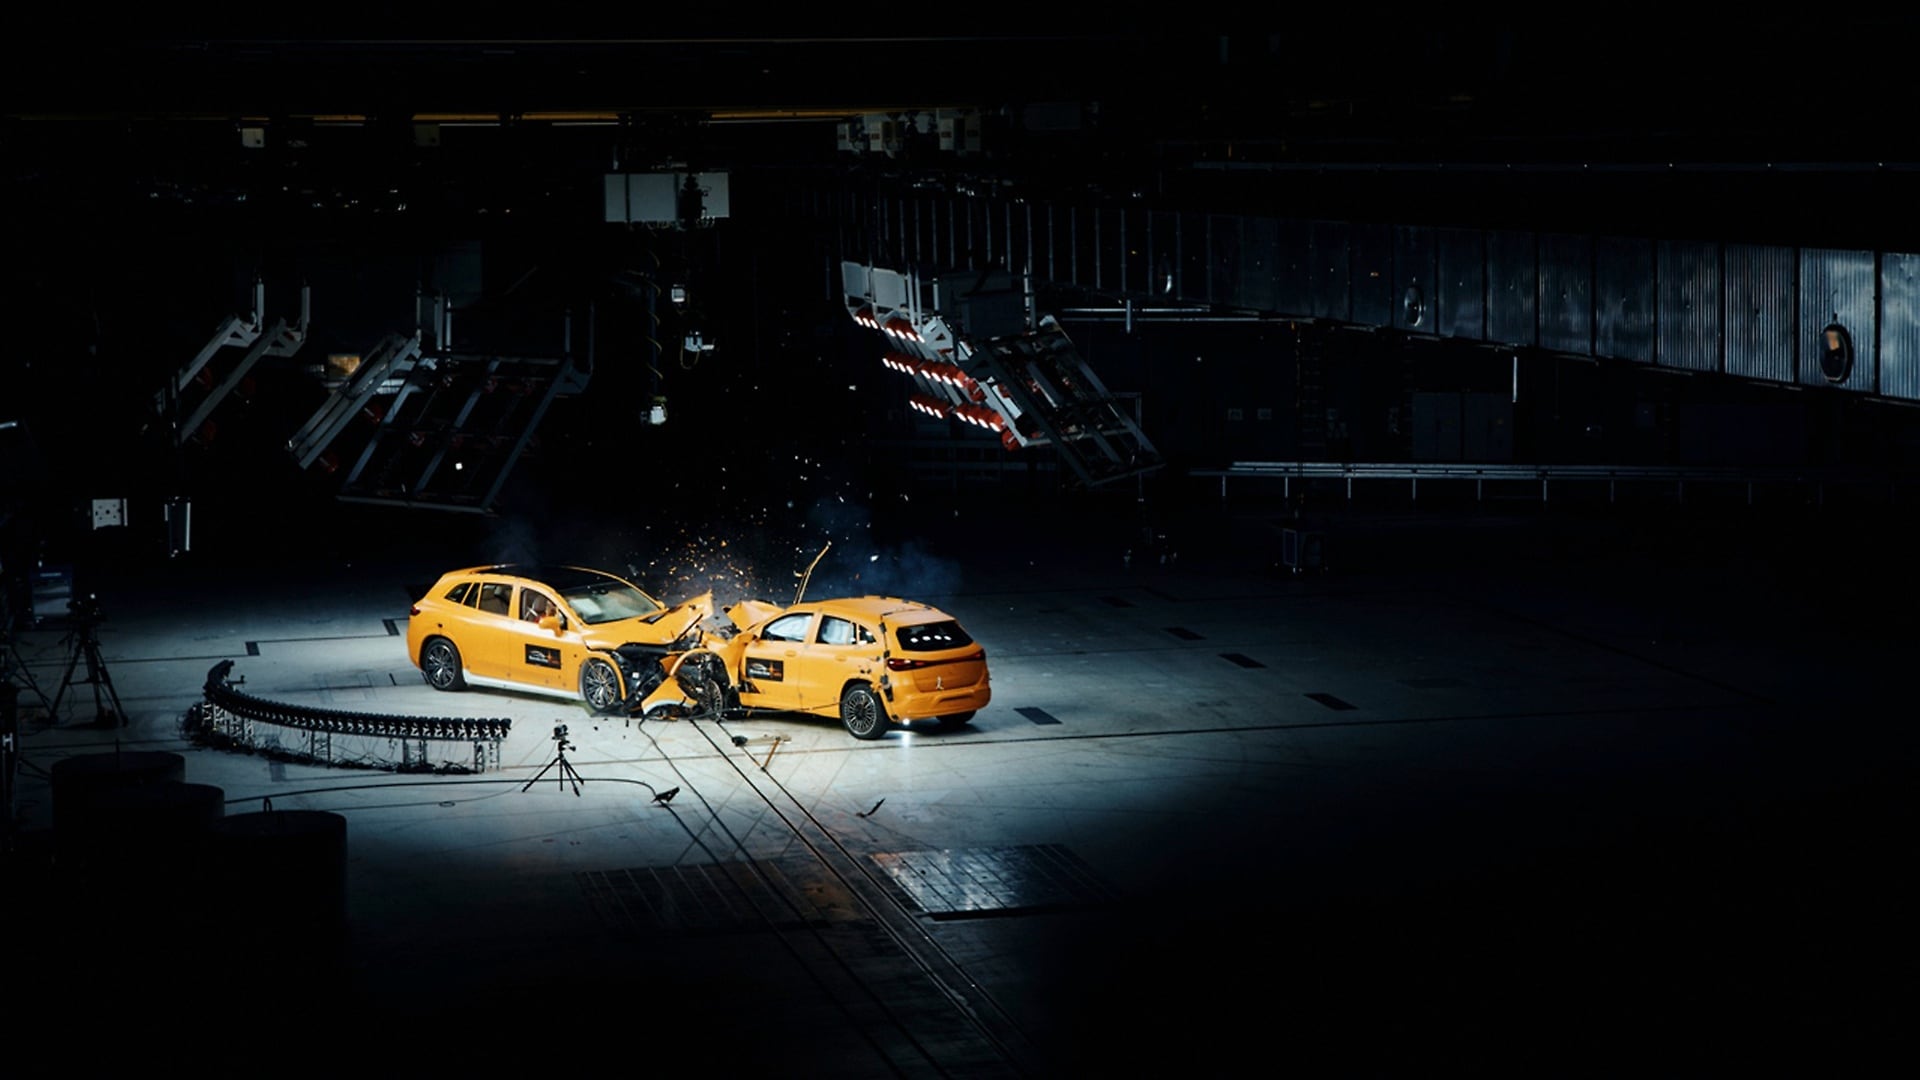 The "real-life" crash test shows that Mercedes-Benz's electric vehicles are every bit as safe as any other Mercedes-Benz model.